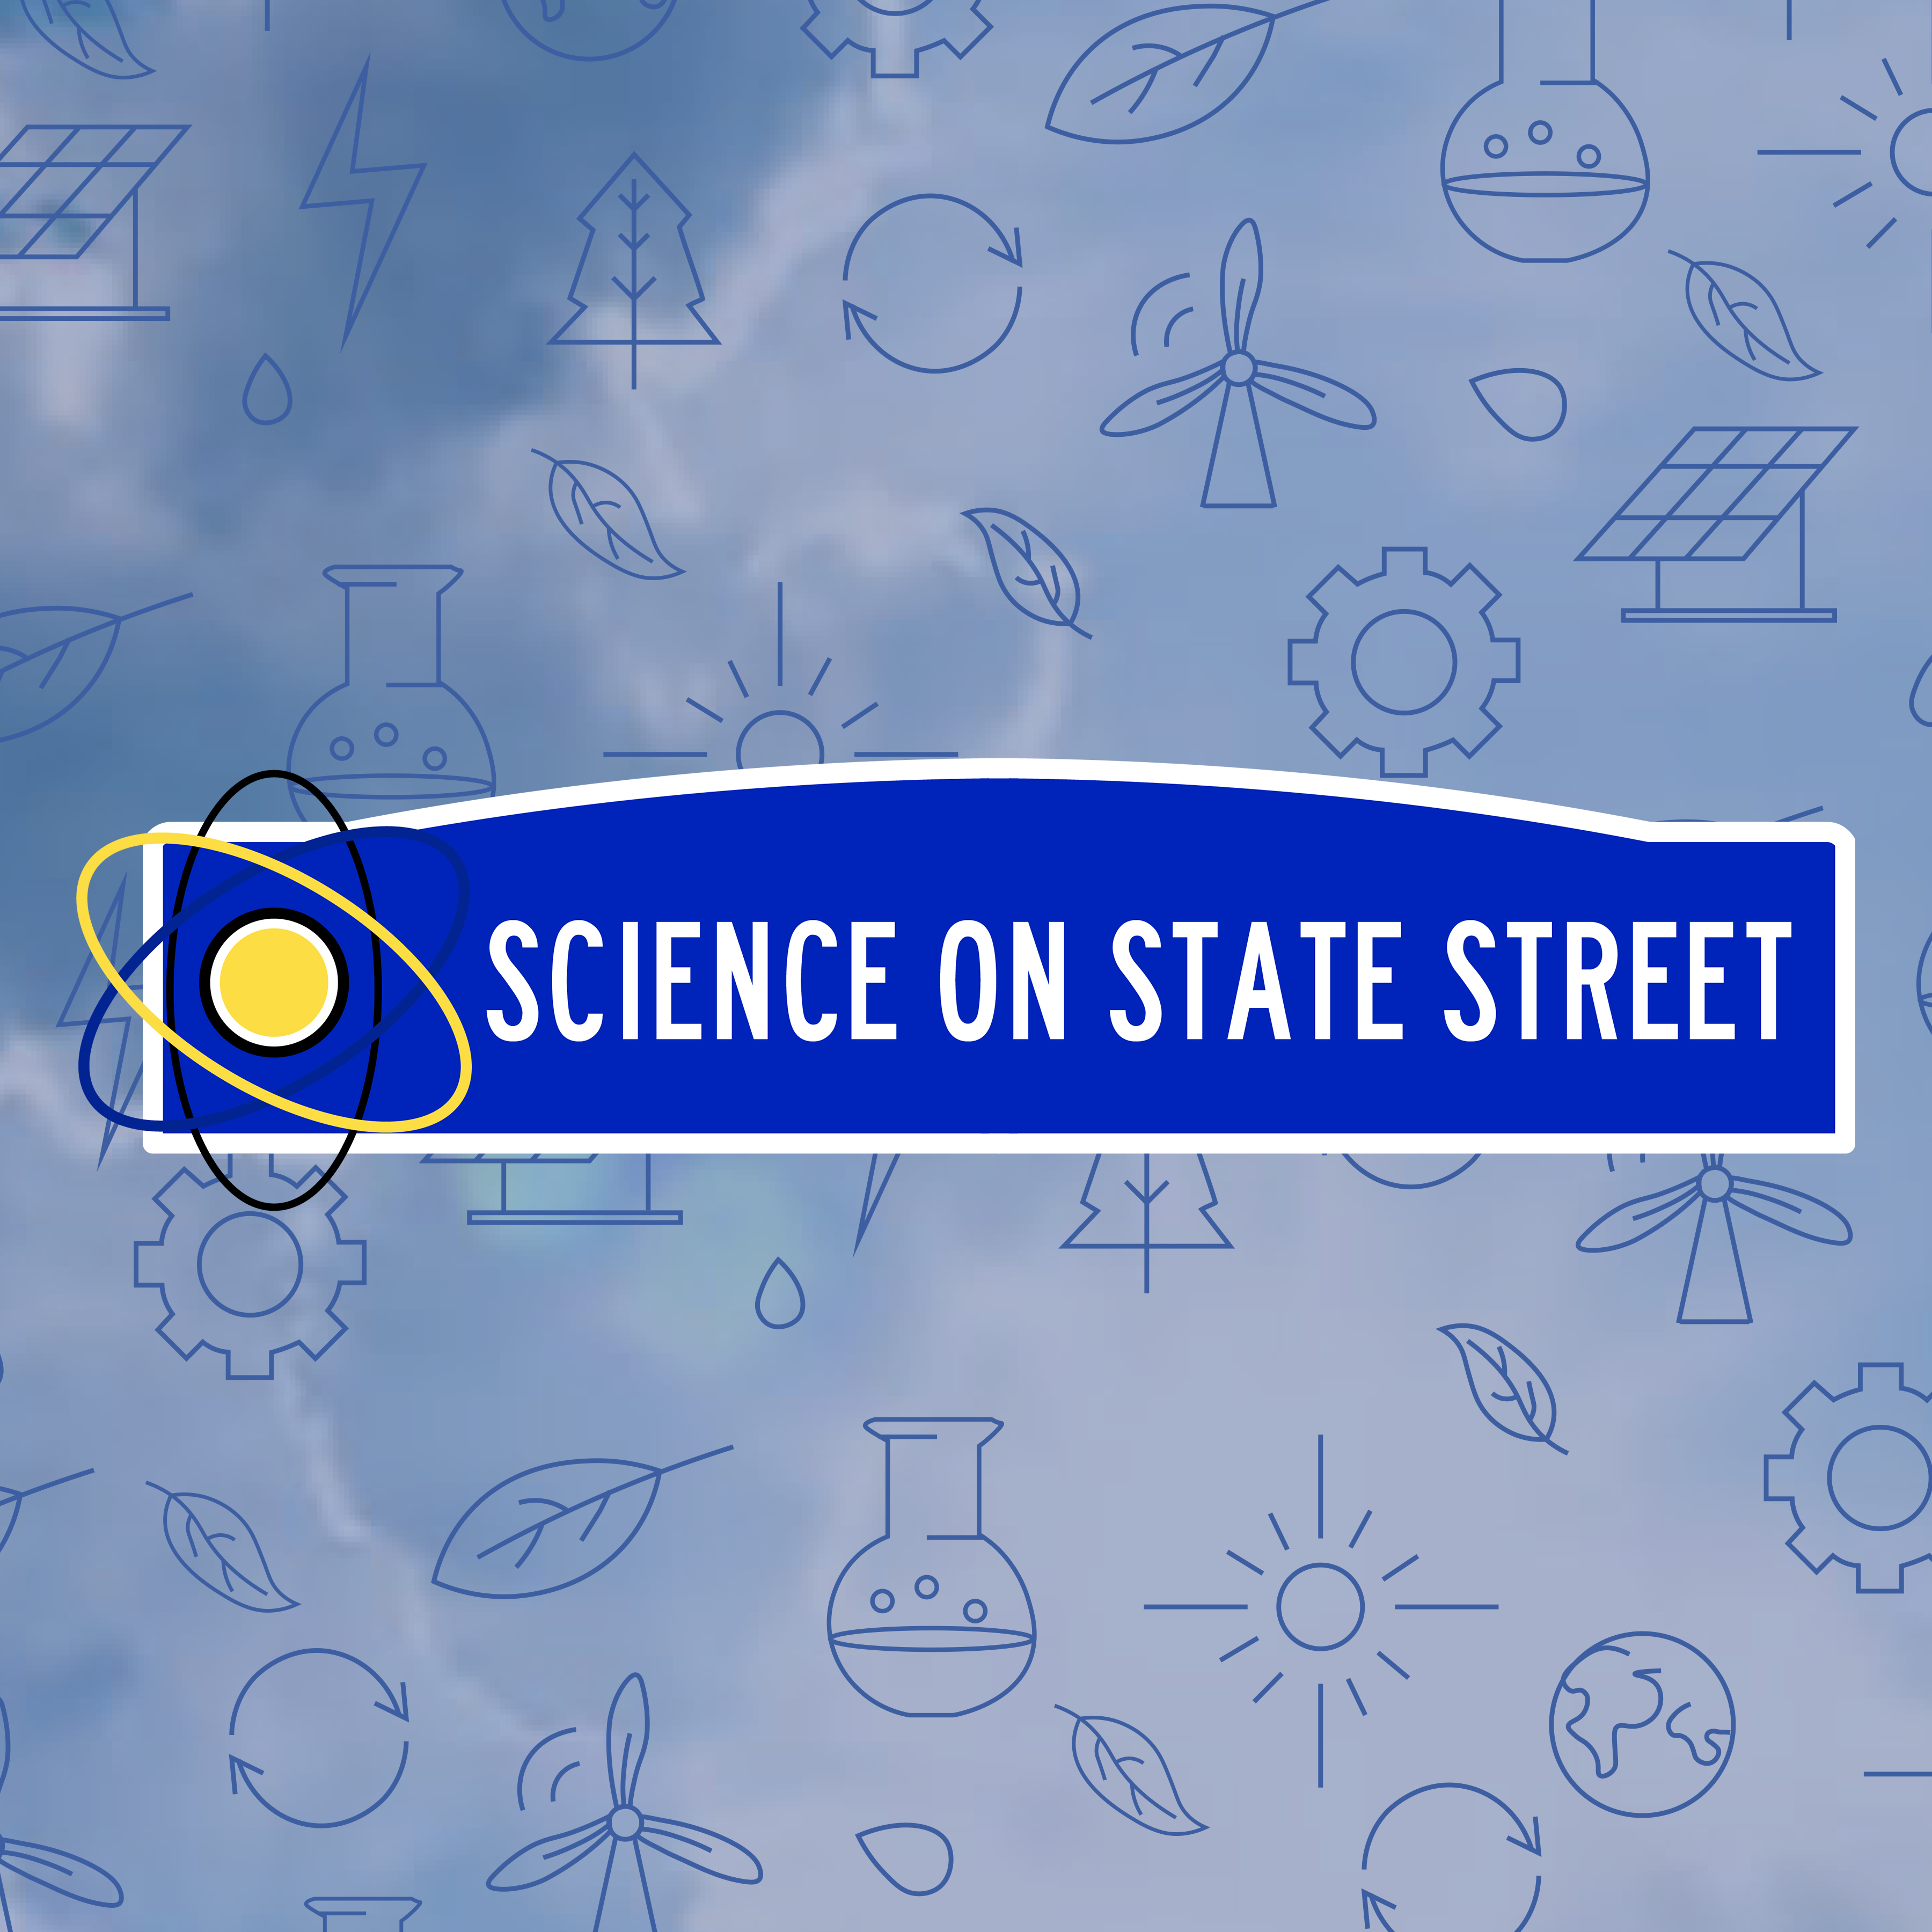 A Science Event on State Street – Saturday, April 27 from 12-3PM